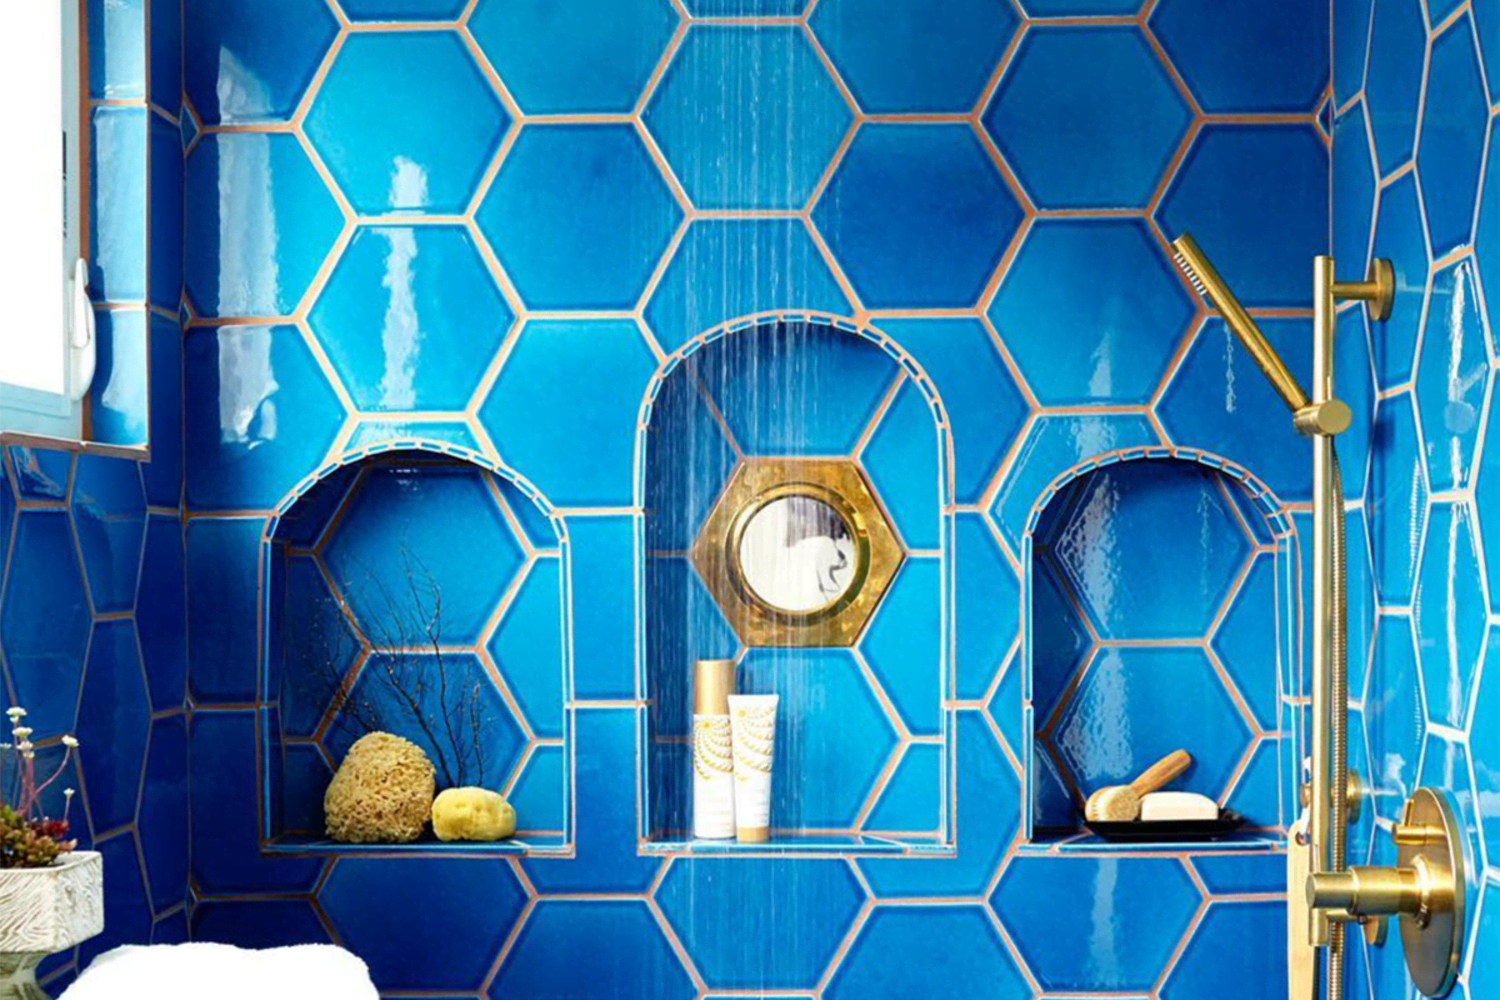 Unusual Tile & Colored Grout Combos That Are Gorgeous